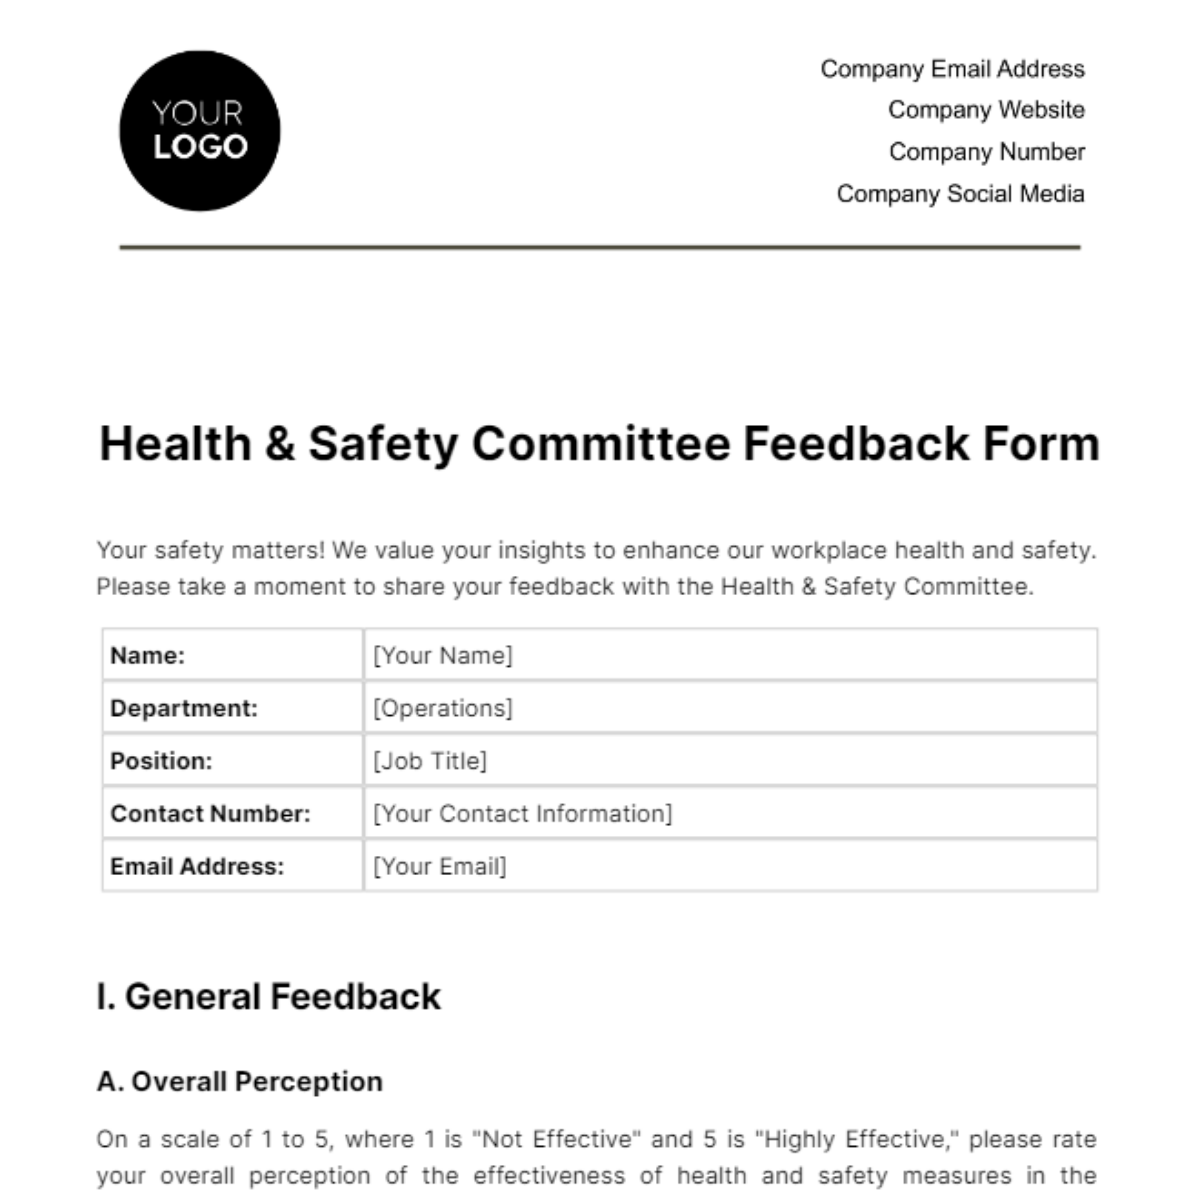 Health & Safety Committee Feedback Form Template